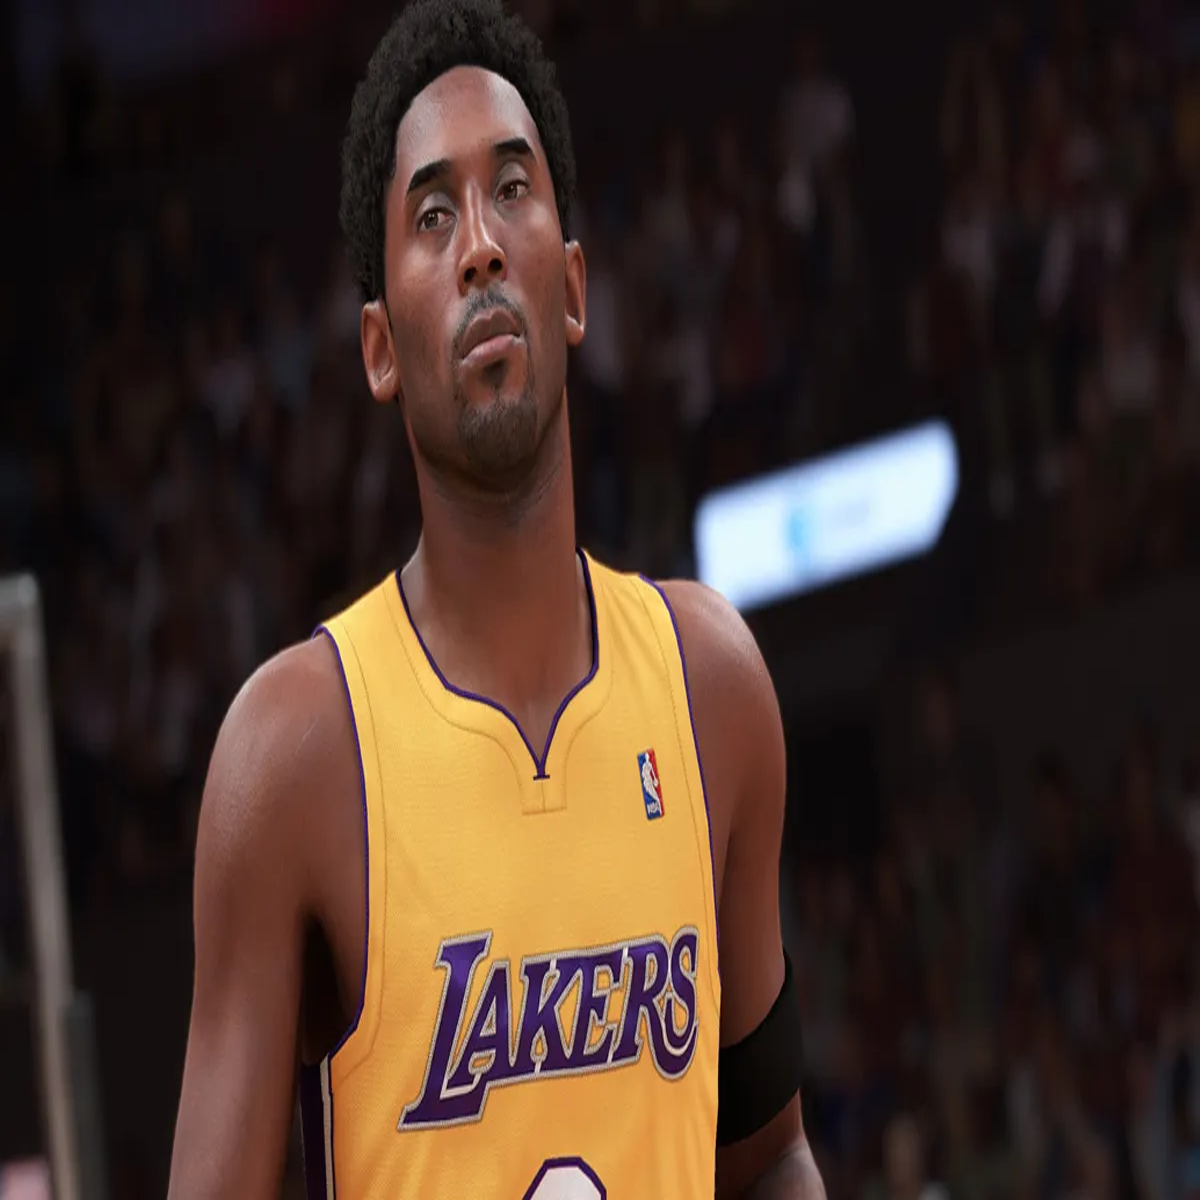 NBA 2K24 is Out on PC! Here's Our Price Comparison